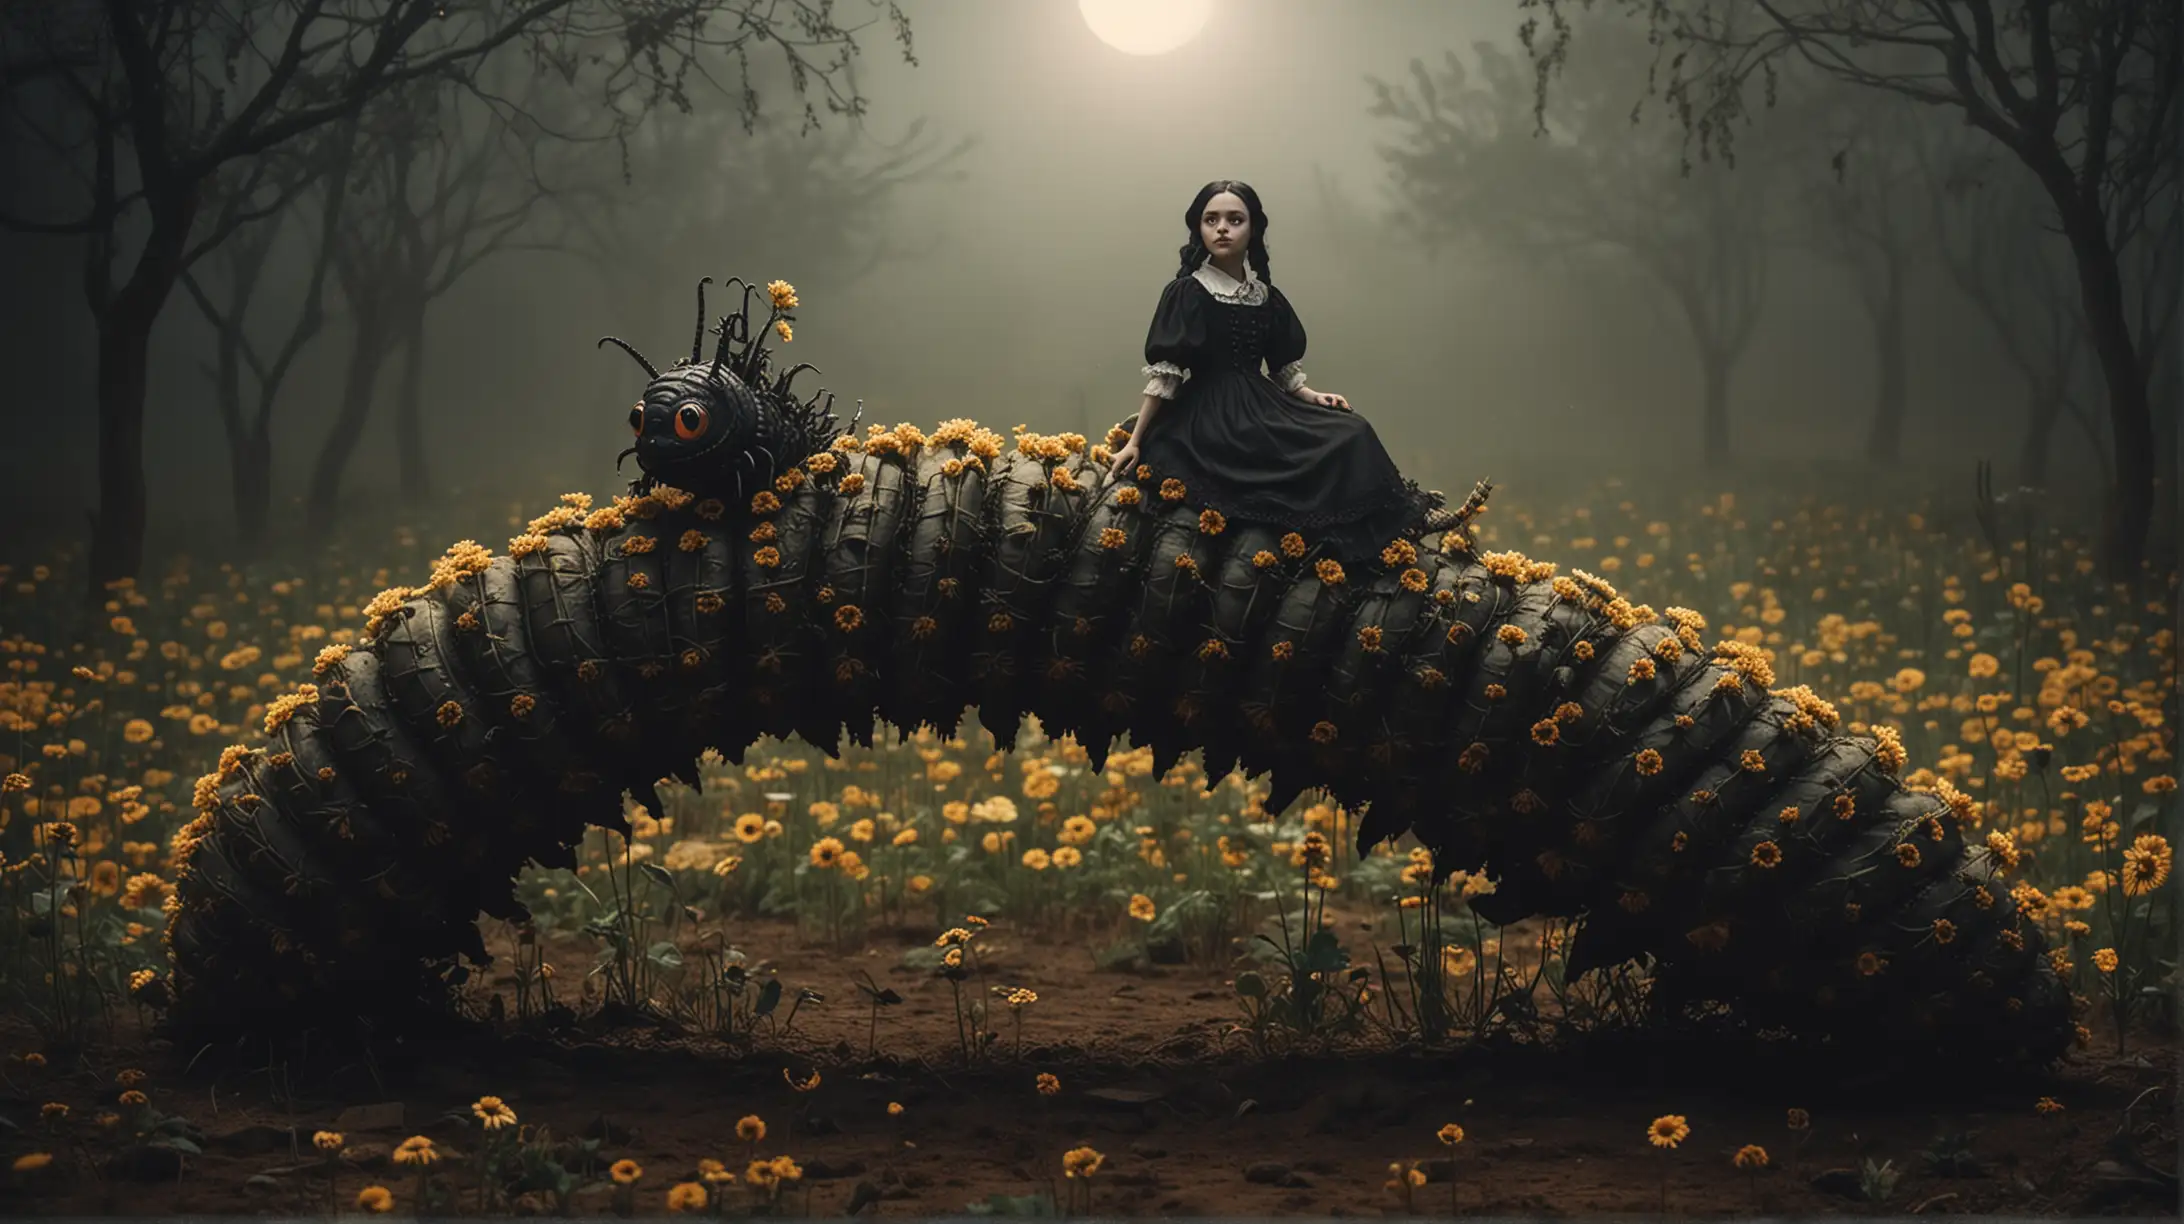 dark moody soft focus full body image. Wednesday Adams, riding a giant caterpillar, the caterpillar is flying over a garden of dry sun flowers, in a foggy night of full moon